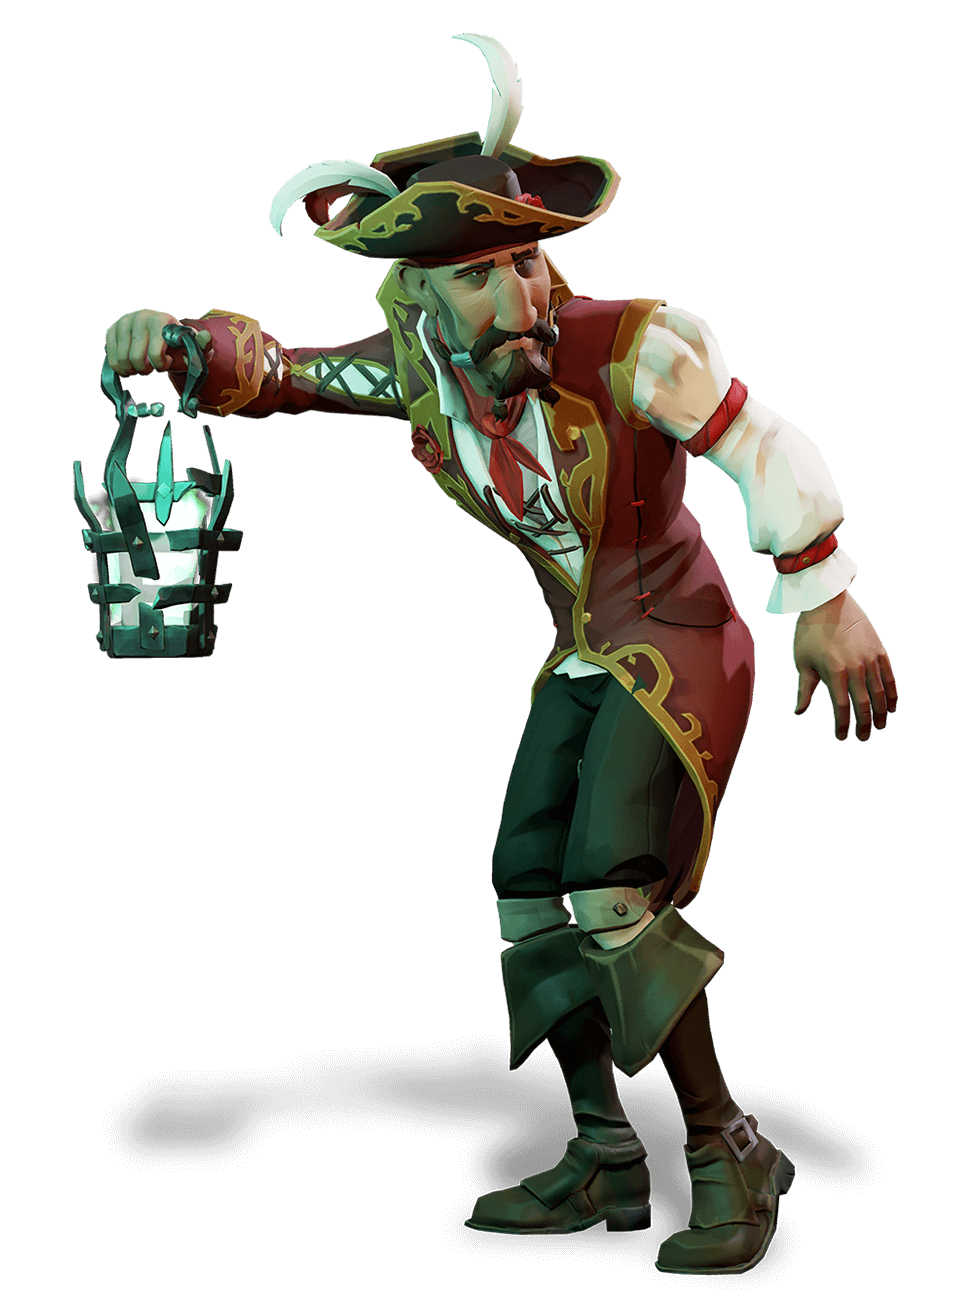 Sea of Thieves Sea of Thieves: Fort of the Damned. www.seaofthieves.com. 